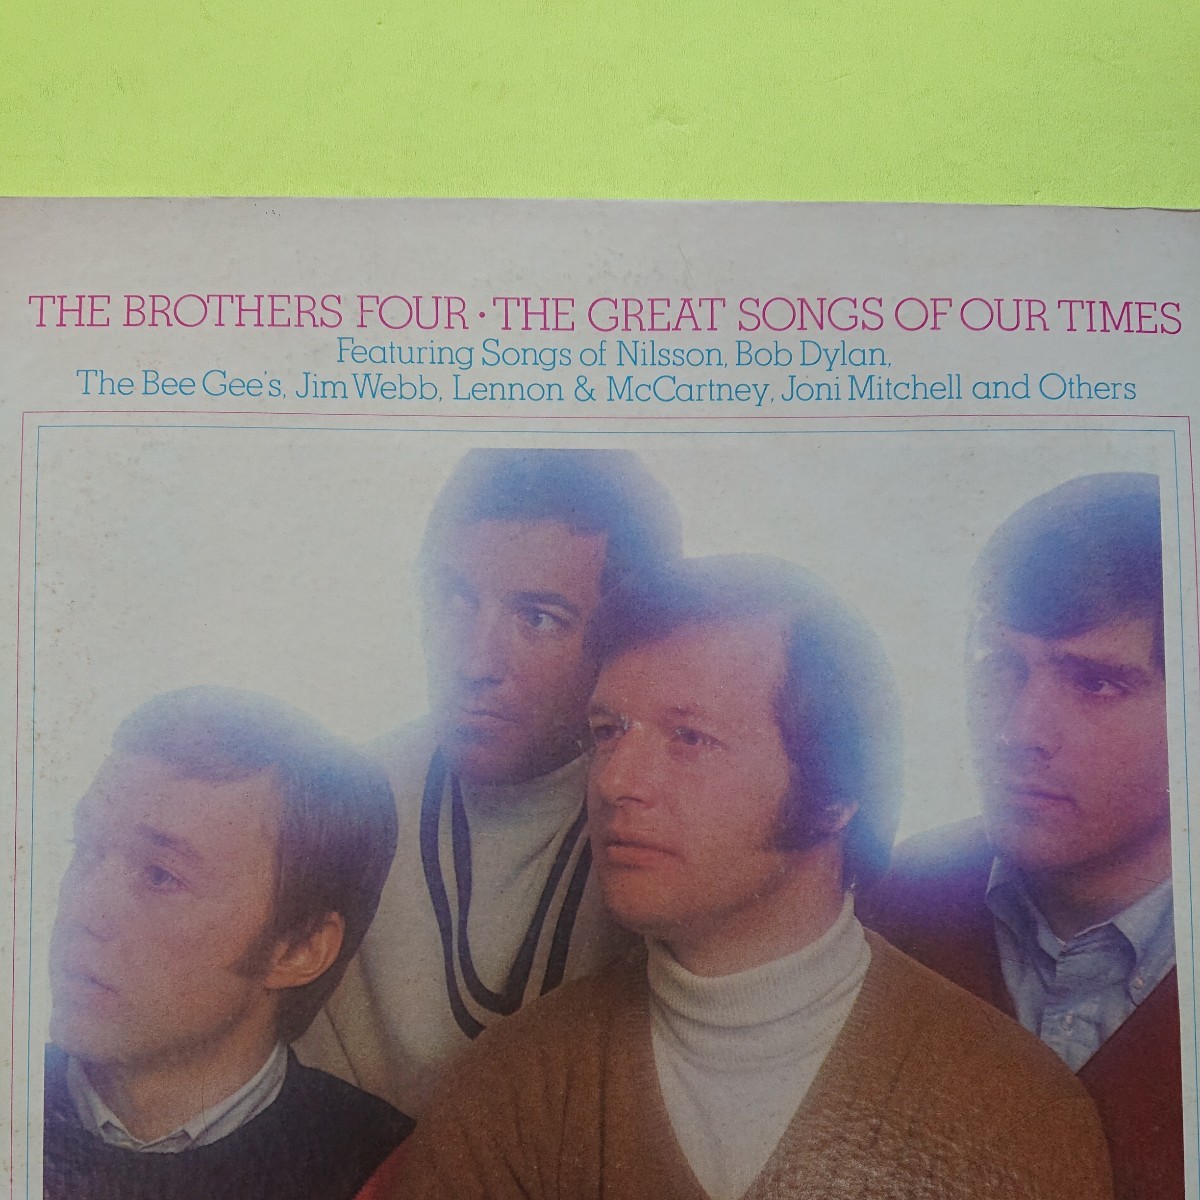 LP(輸入盤)/BROTHERS FOUR〈GREAT SONGS OF OUR TIMES〉☆5点以上まとめて（送料0円）無料☆_画像6